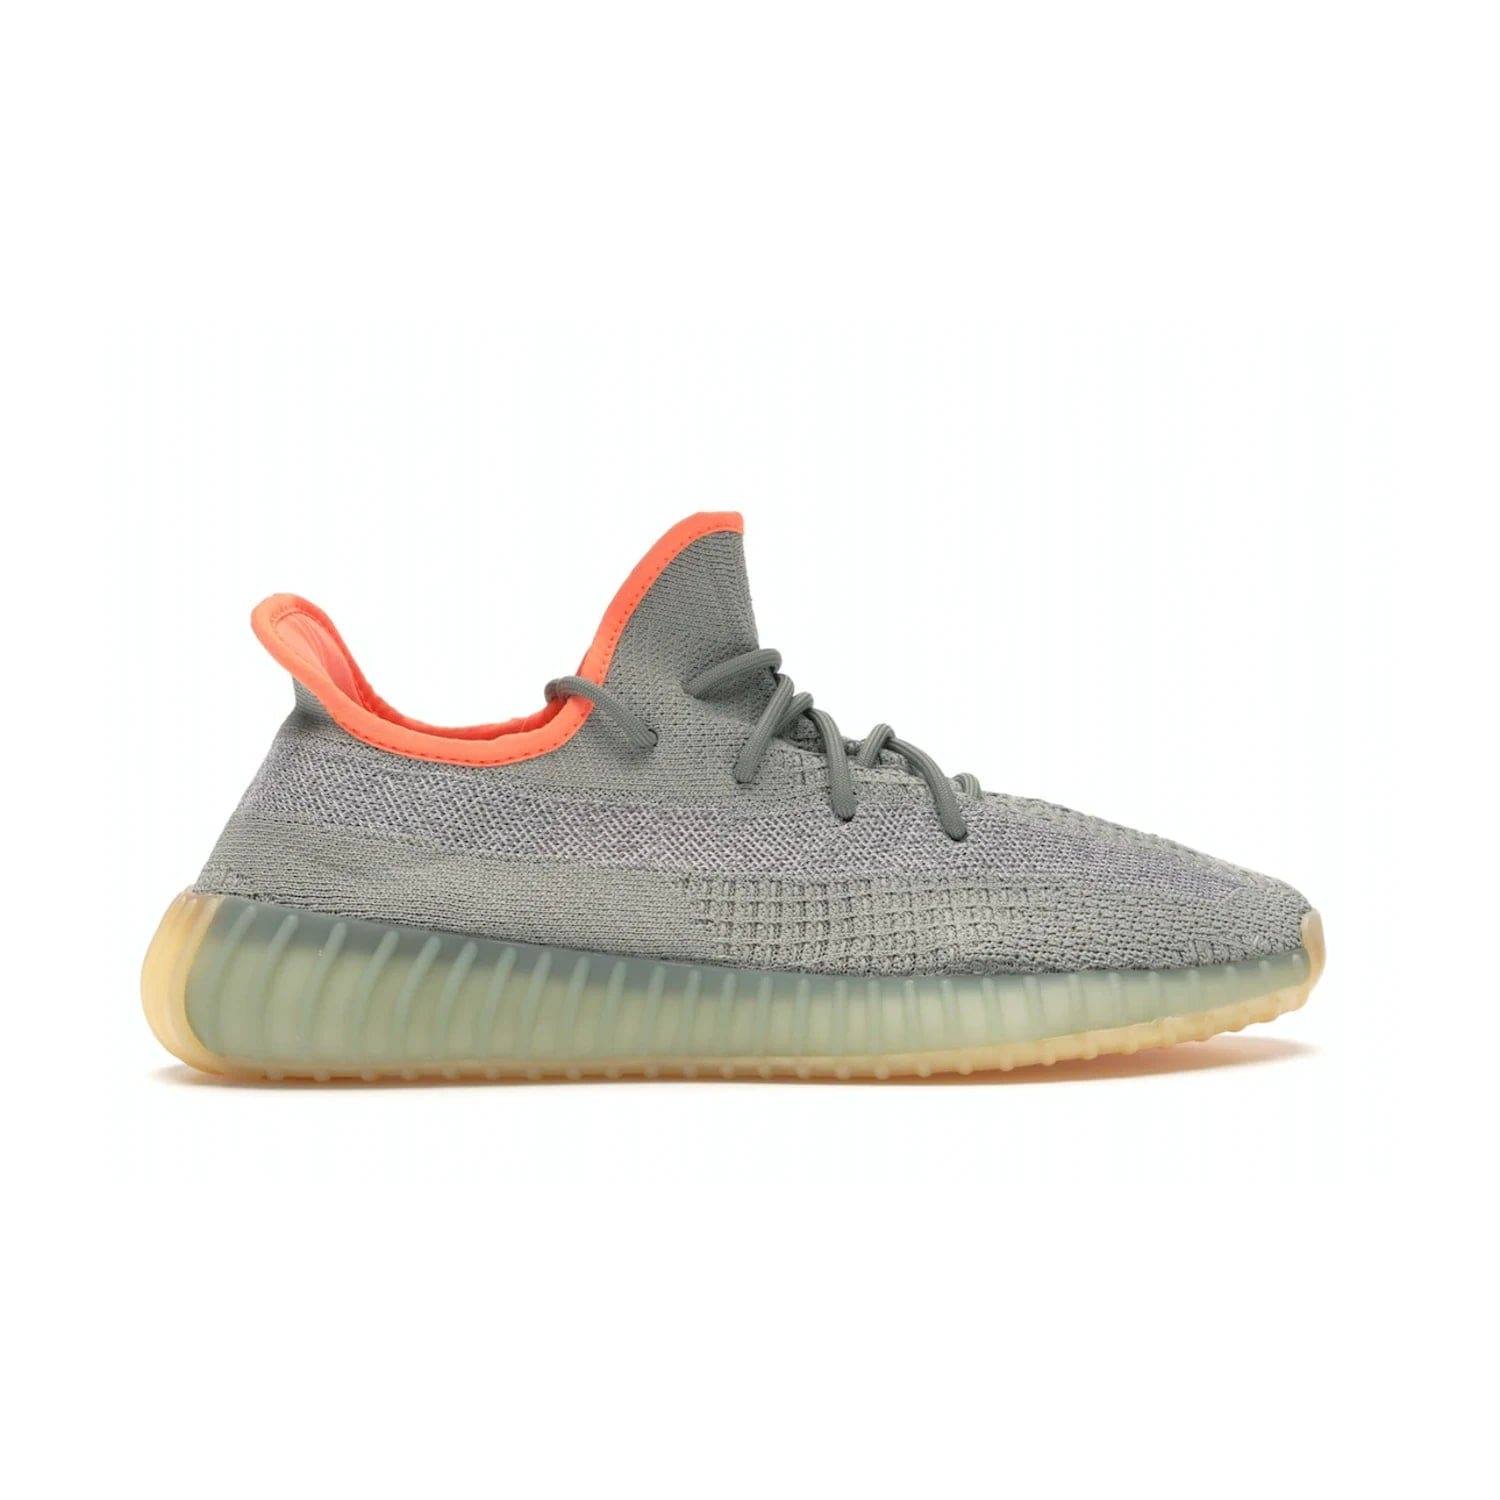 adidas Yeezy Boost 350 V2 Desert Sage - Image 36 - Only at www.BallersClubKickz.com - Upgrade your style with the adidas Yeezy Boost 350 V2 Desert Sage. This 350V2 features a Desert Sage primeknit upper with tonal side stripe, and an orange-highlighted translucent Boost cushioning sole. Stay on-trend in effortless style.